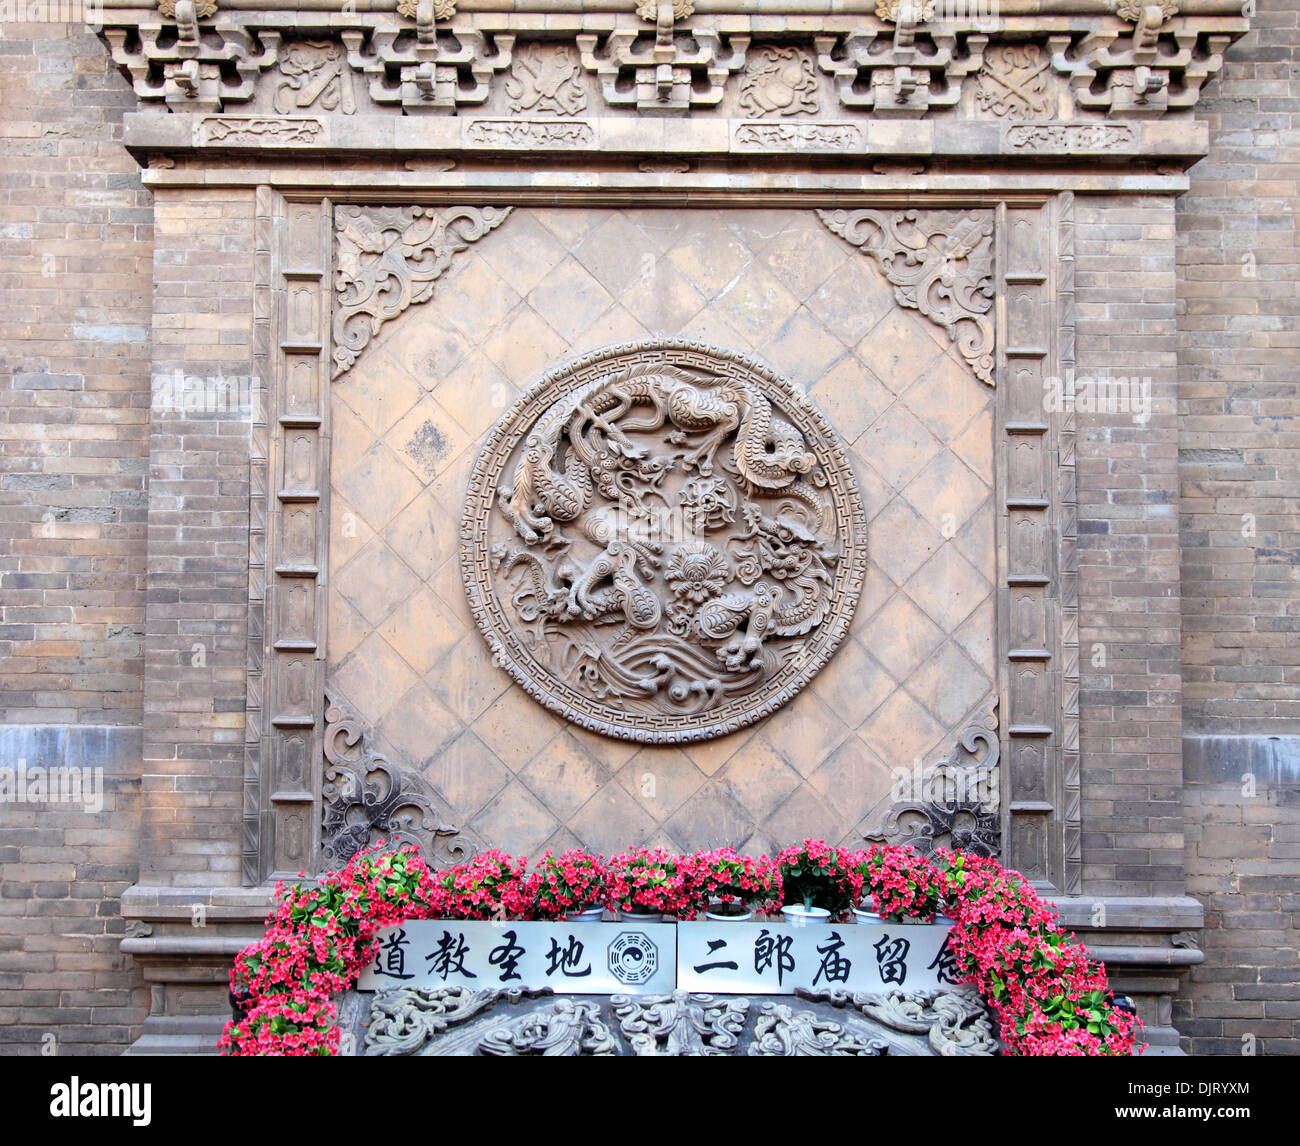 Cocarde avec dragon, Pingyao, Shanxi, Chine Banque D'Images